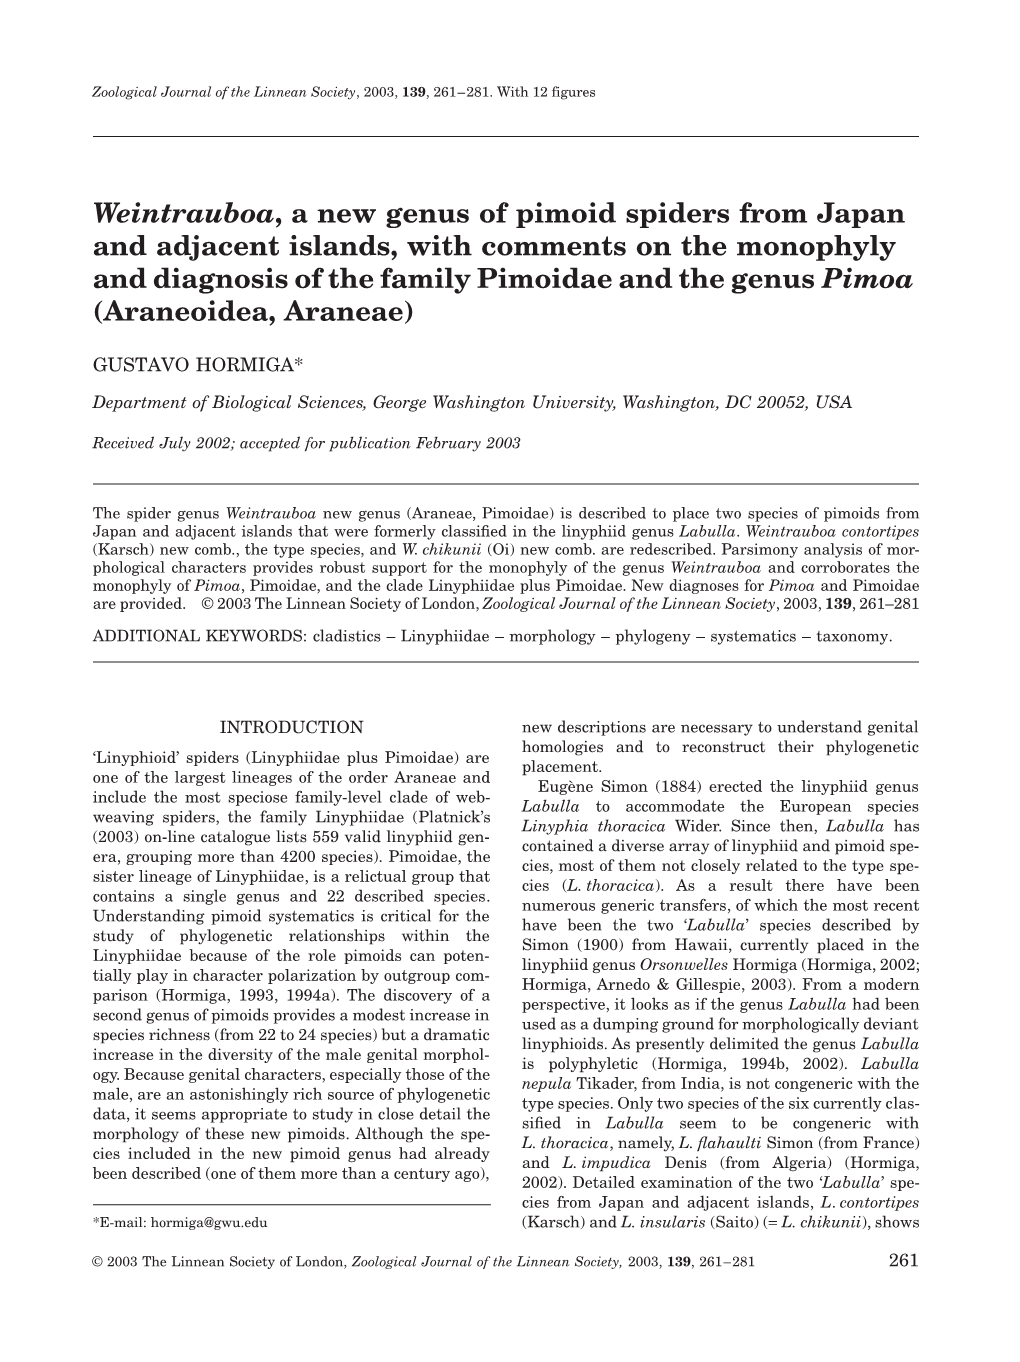 Weintrauboa, a New Genus of Pimoid Spiders from Japan and Adjacent